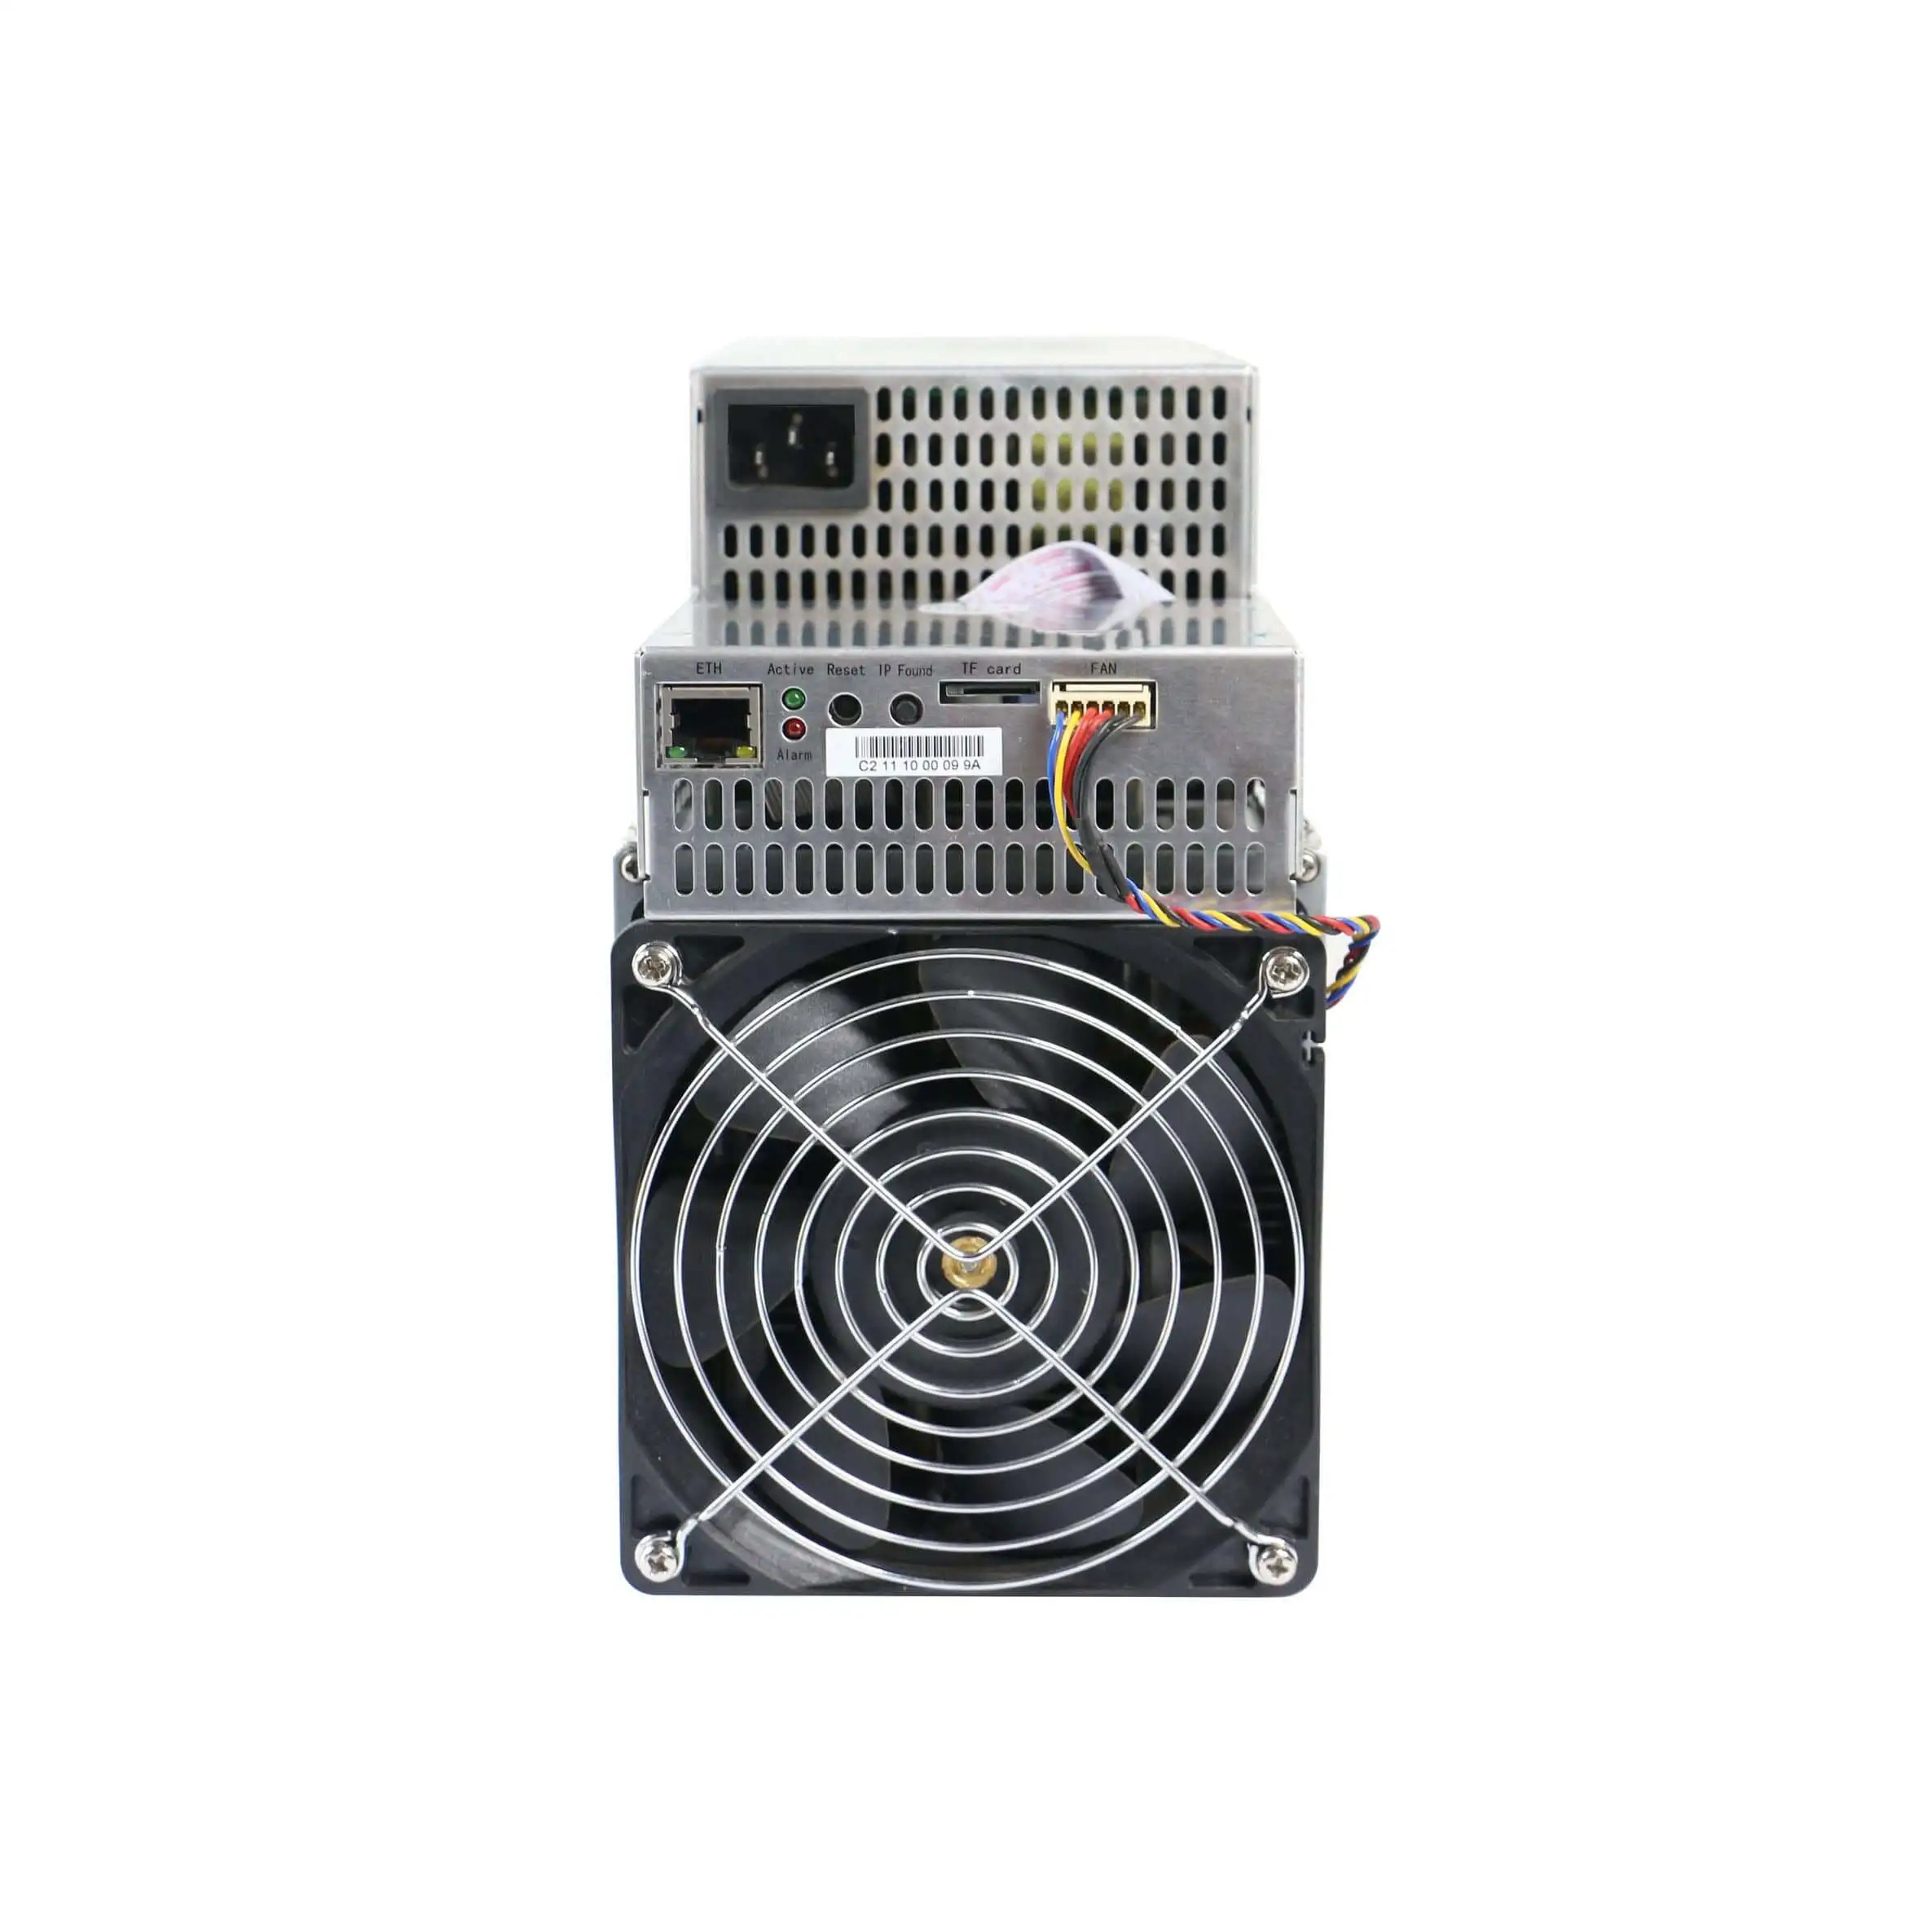 

Microbt Whatsminer miner M31s MicroBT mining SHA-256 algorithm with a maximum hashrate of 70Th/s for power consumption of 3220W